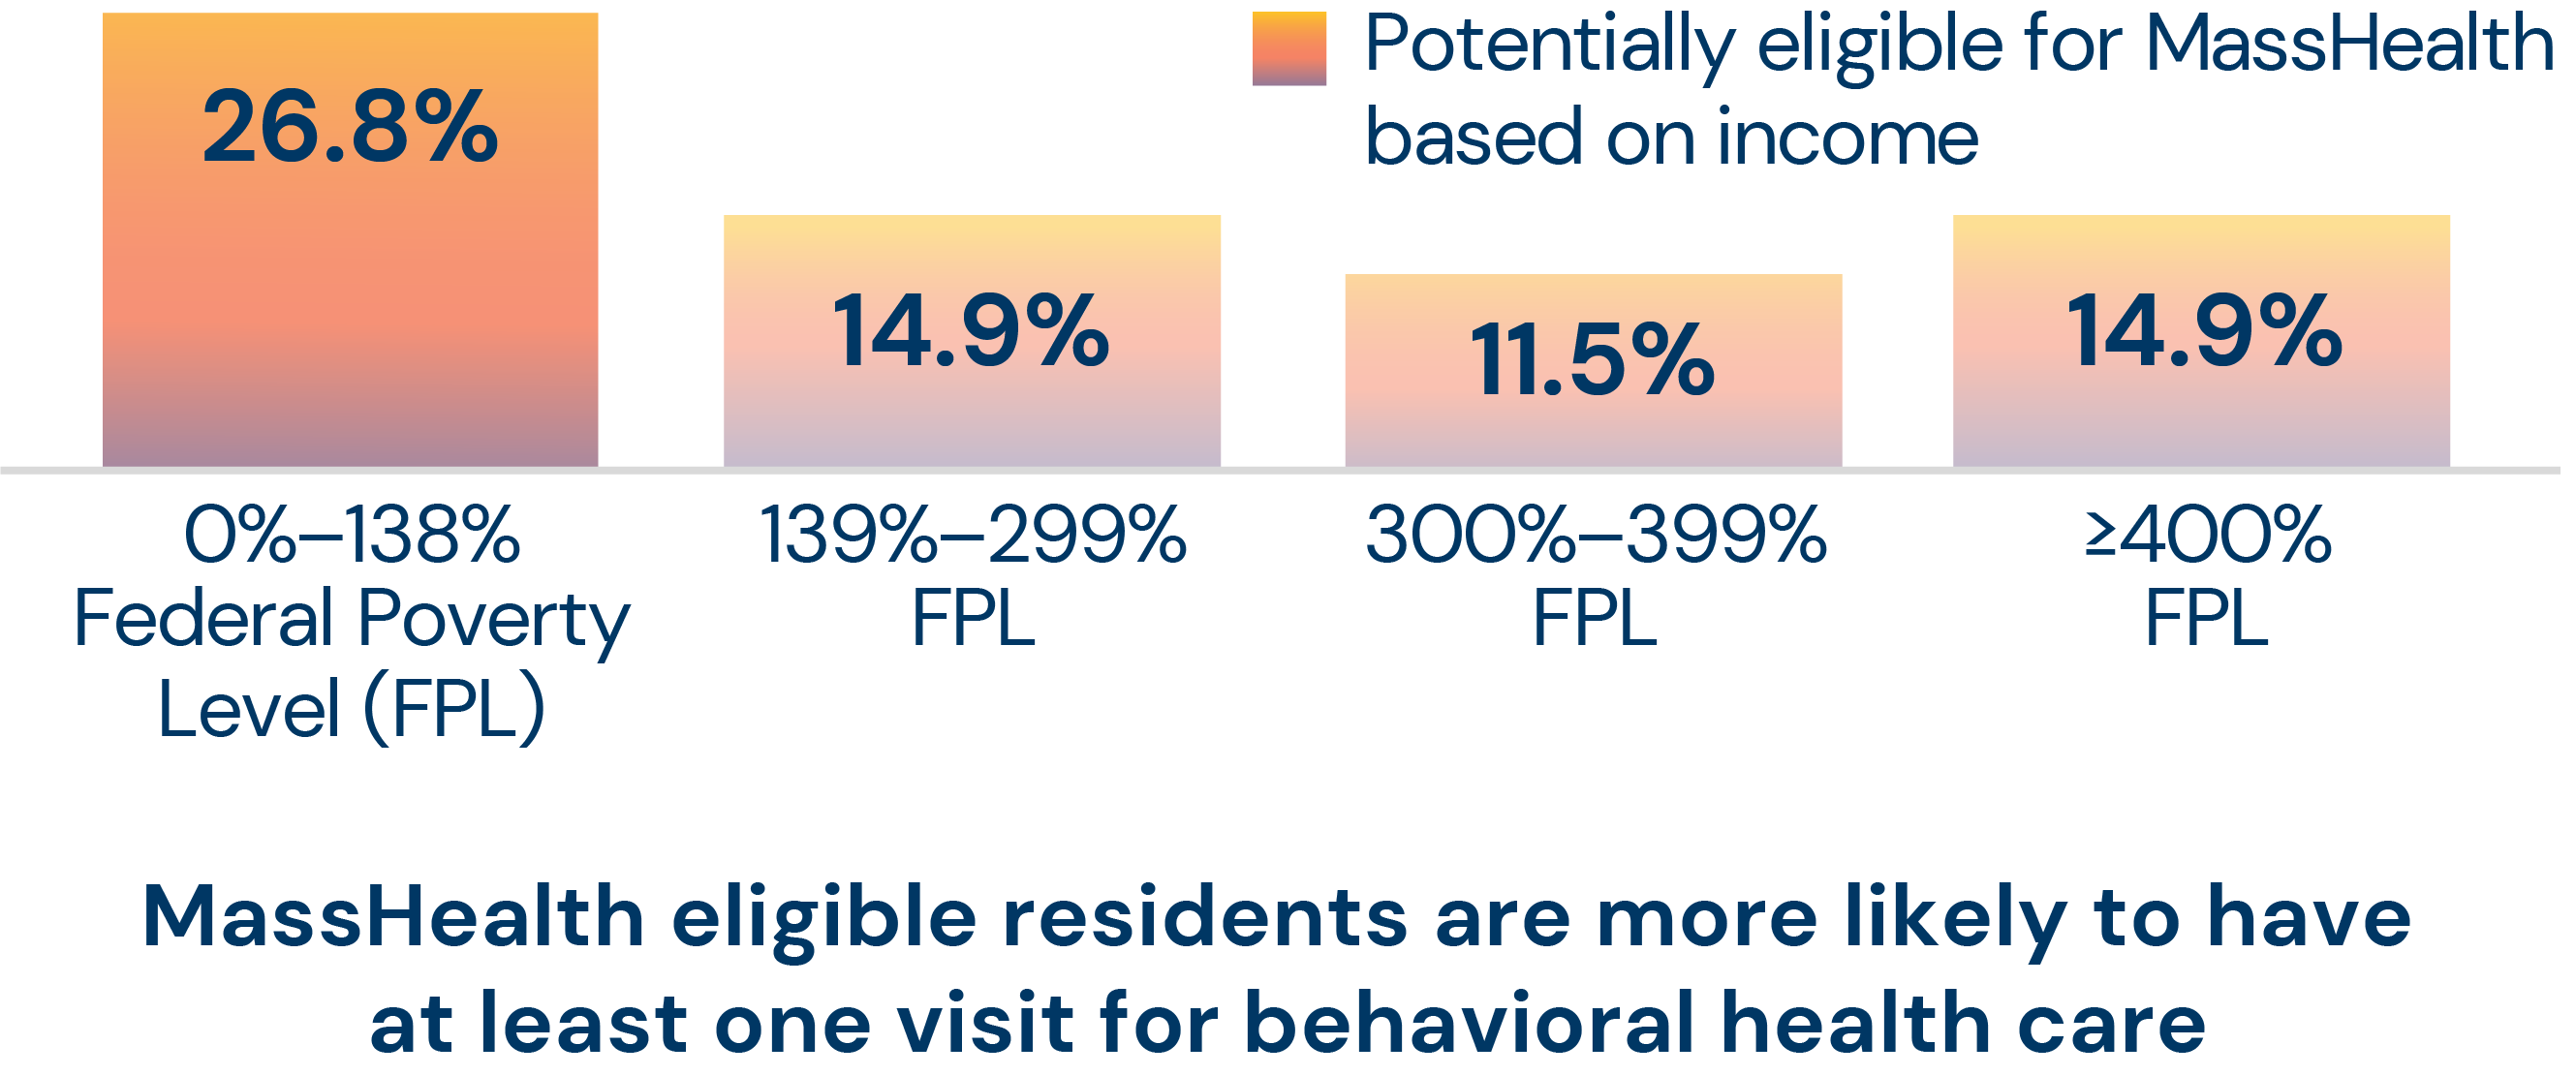 MassHealth eligible residents are more likely to have at least one visit for behavioral health care